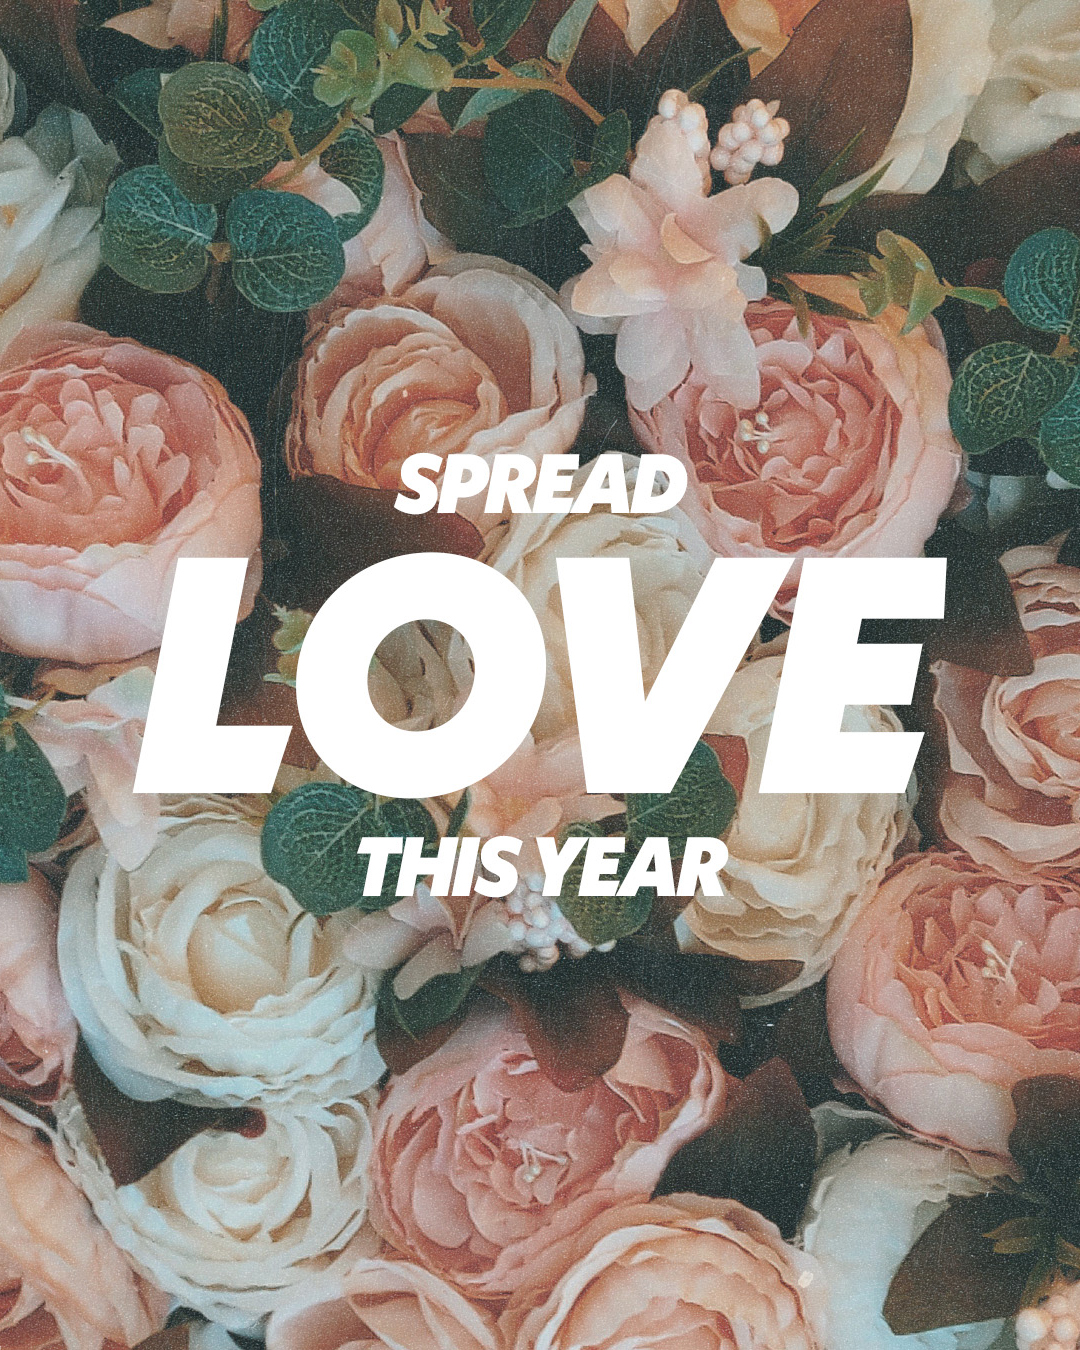 Spread love this year